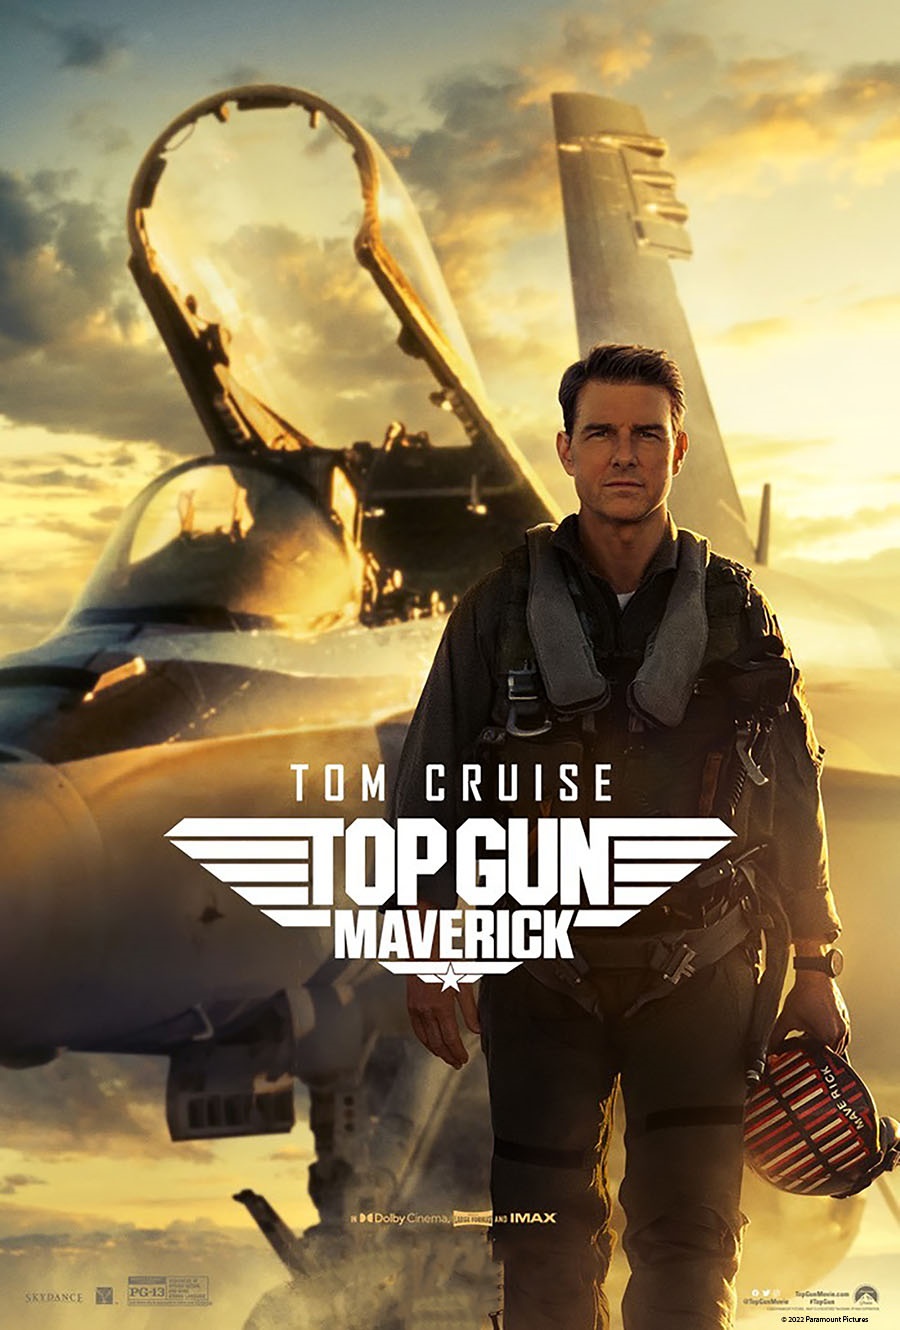 Man in flight uniform standing in front of military jet. Text says Tom Cruise Top Gun Maverick.